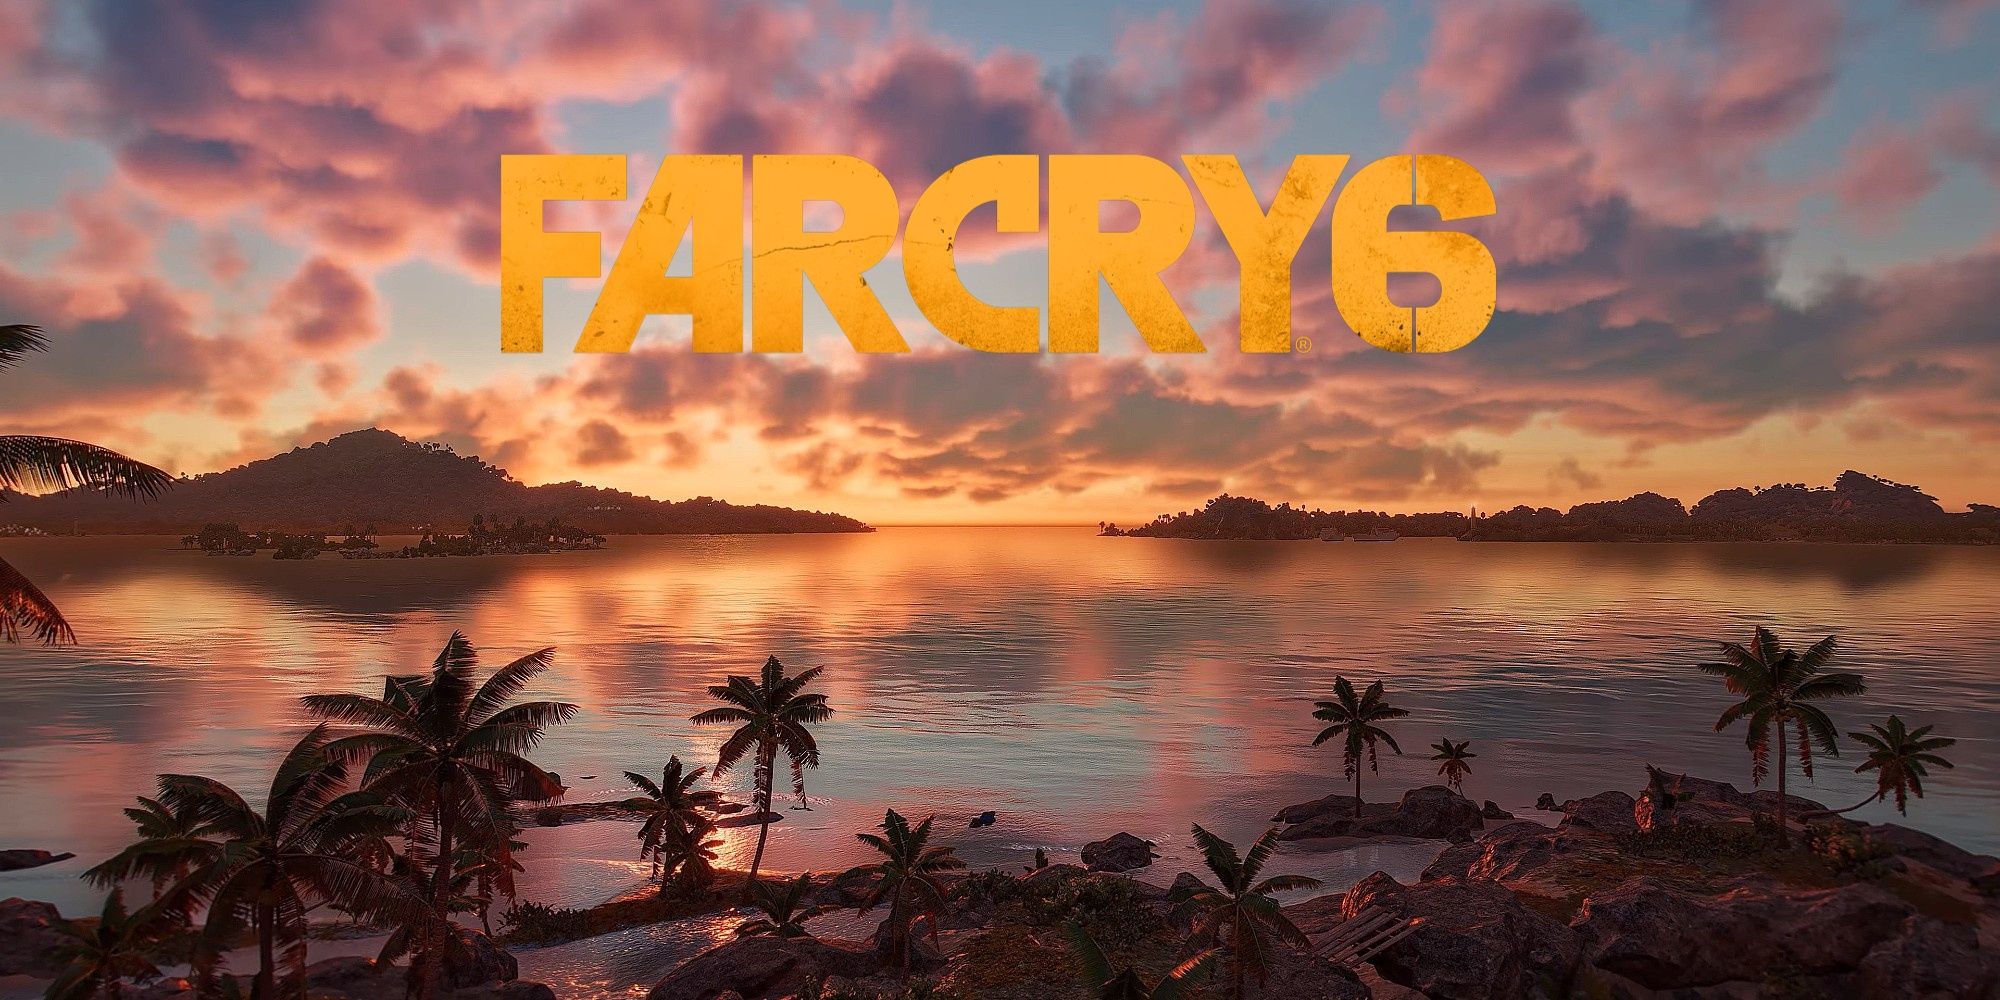 The Far Cry 6 Minimum System Requirements Gaming PC 